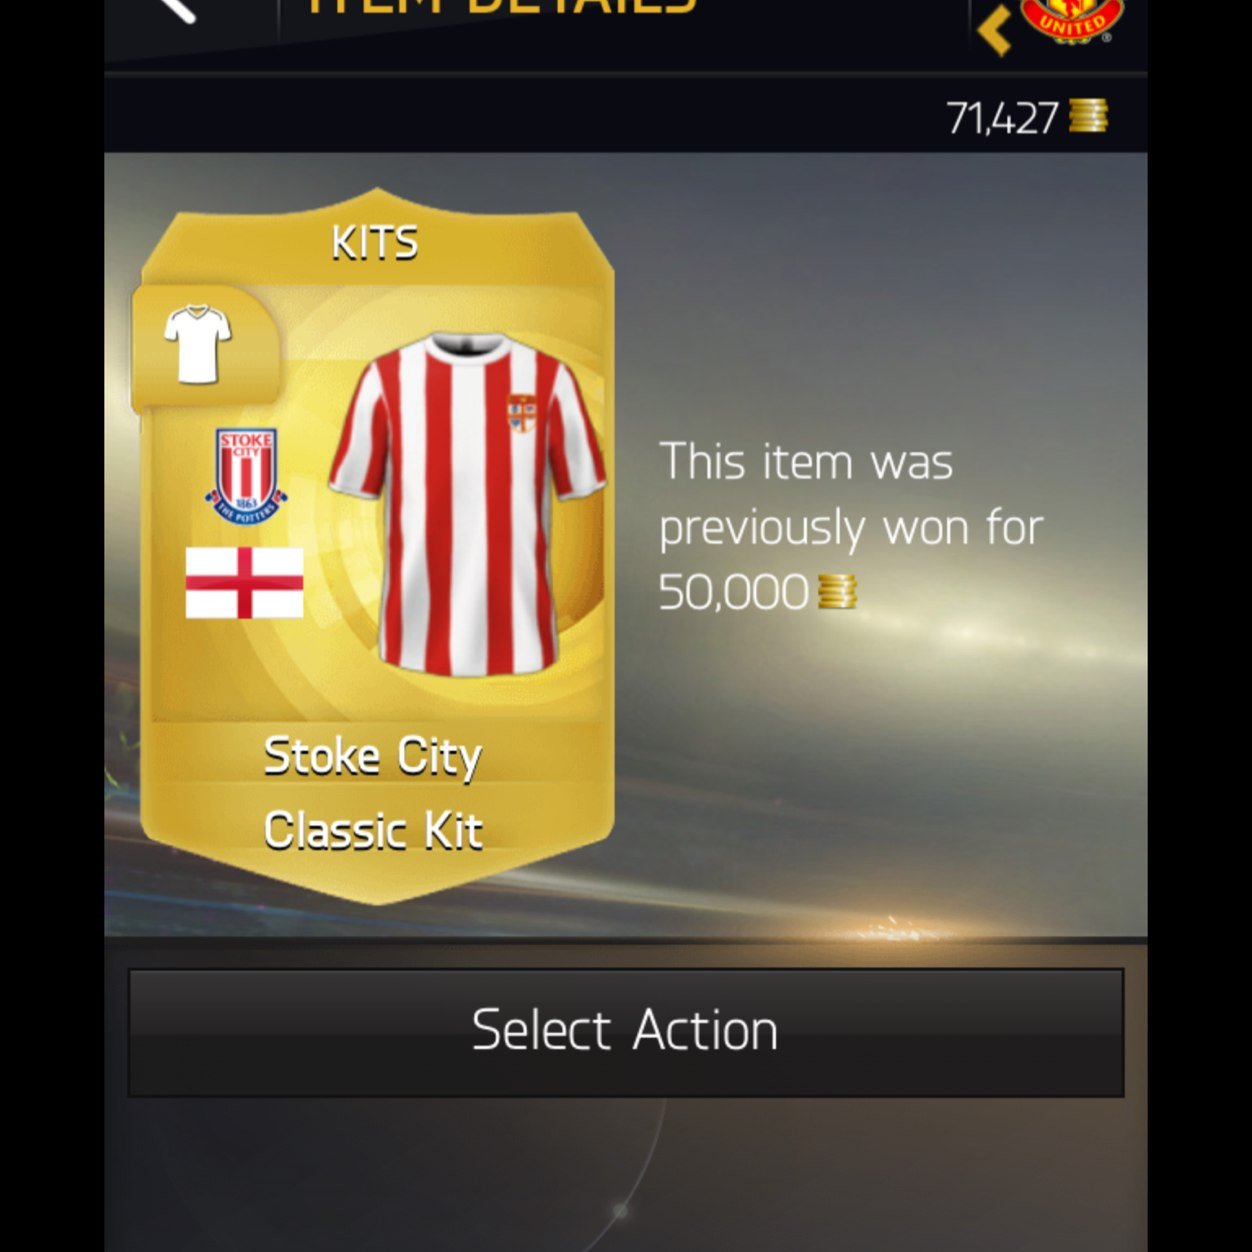 This is a legit account that takes a pays out bets for real football matches through fifa 15 ultimate team on xbox.